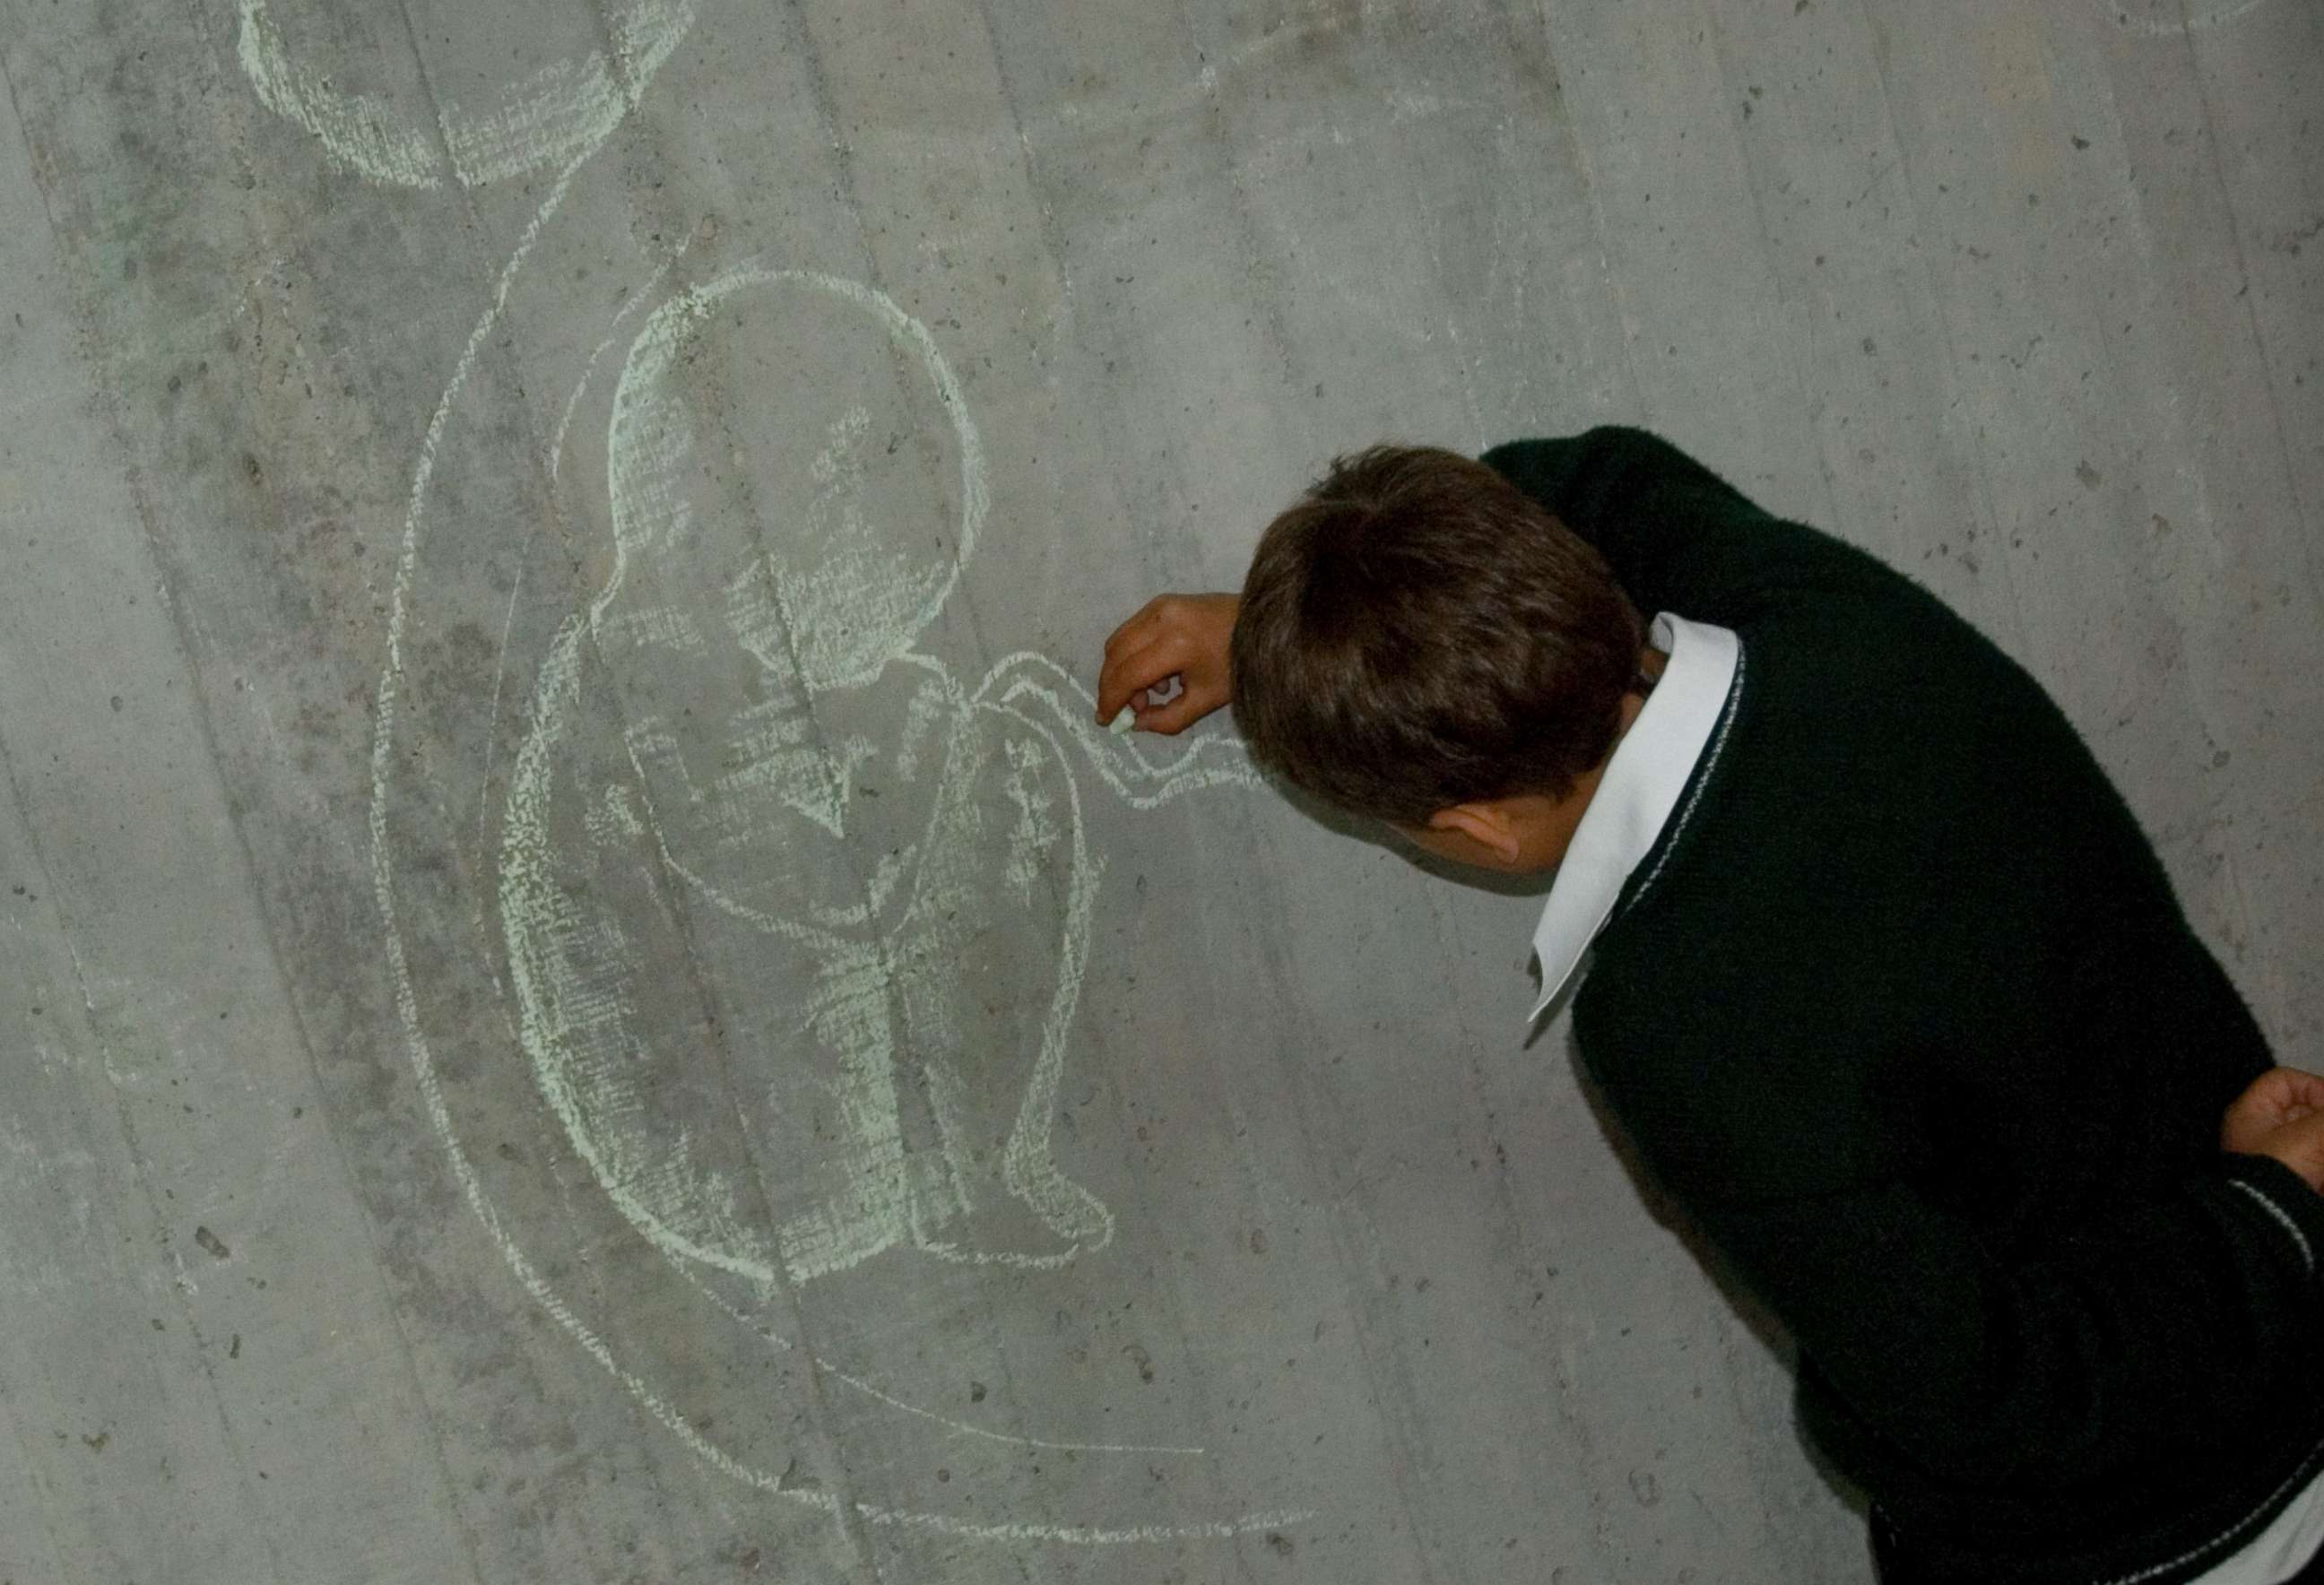 PHOTO: A child draws a fetus on a blackboard during a reproductive health class in Colombia, April 8, 2007.